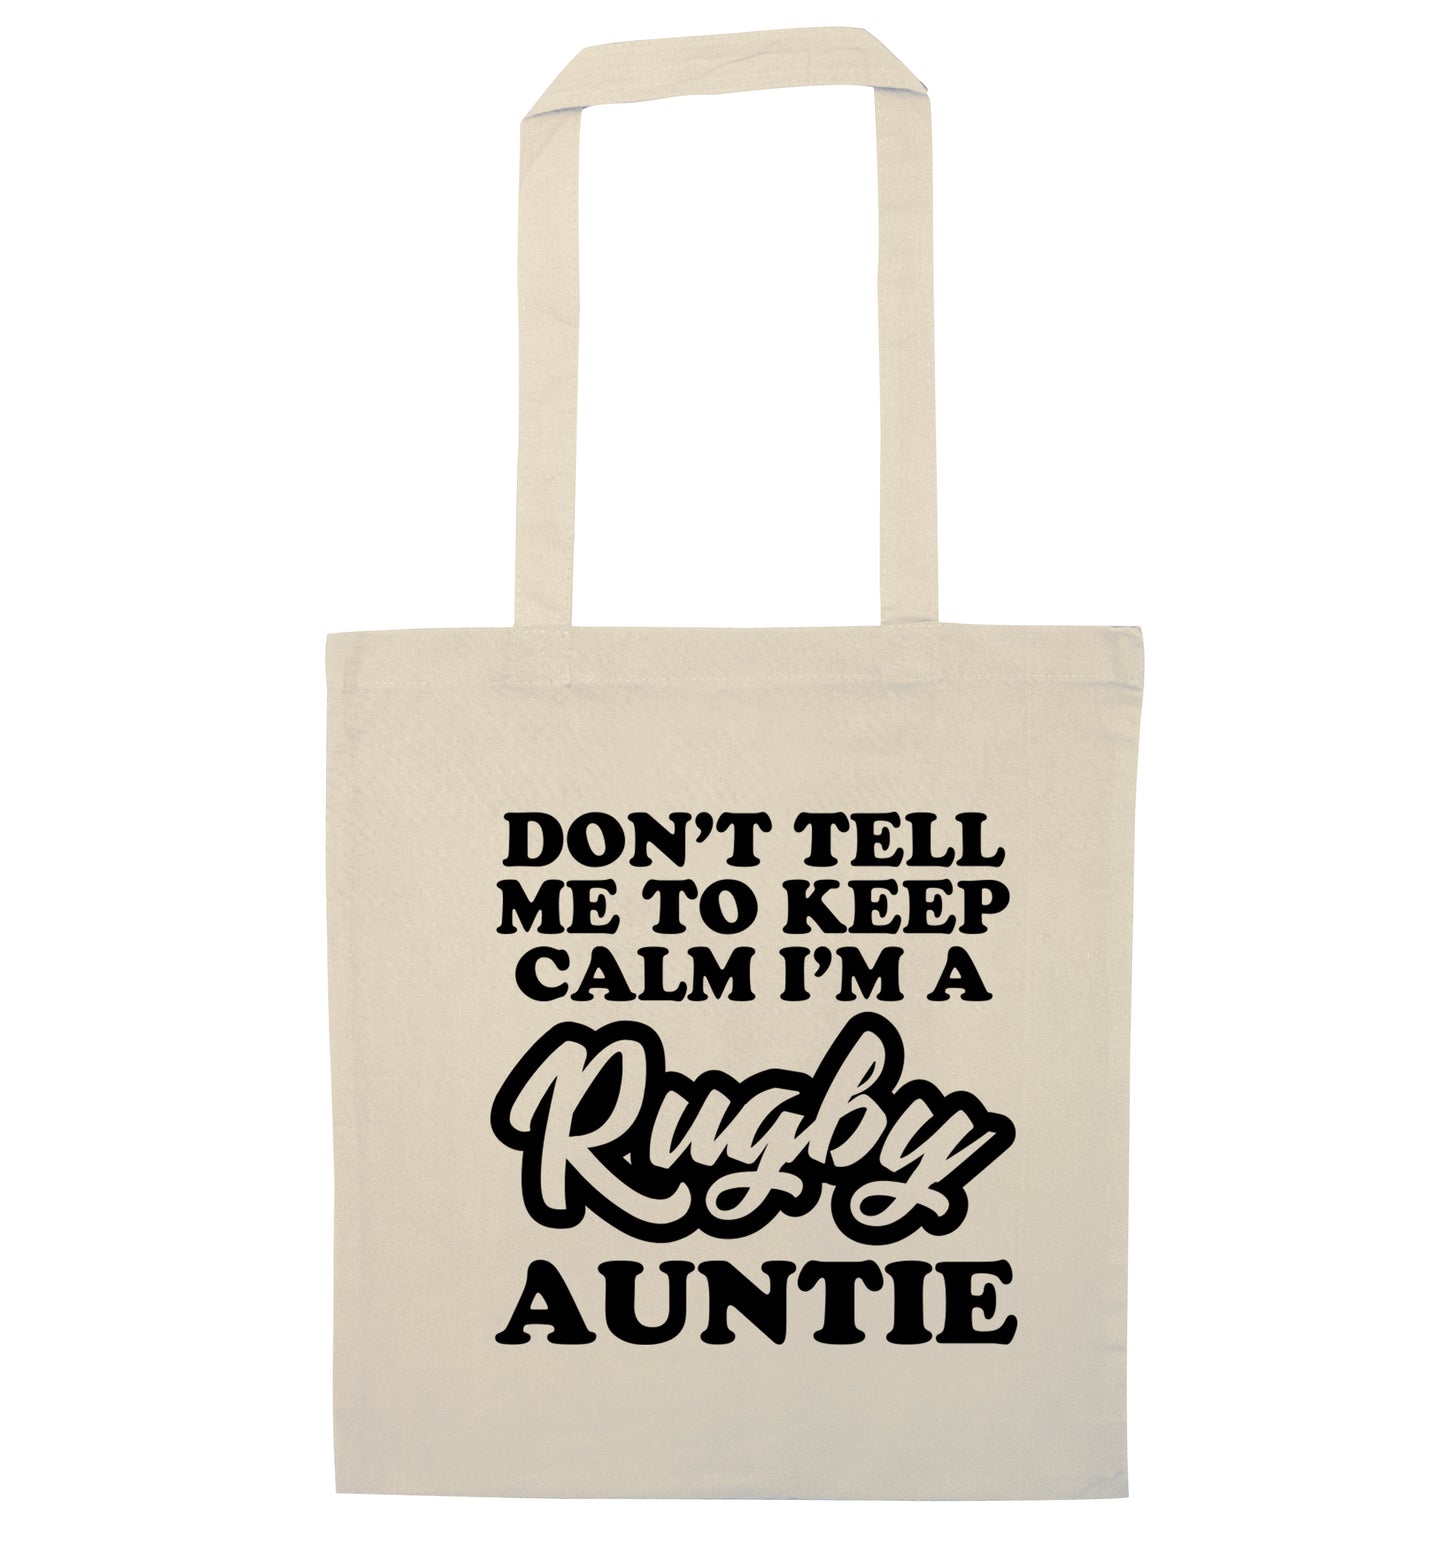 Don't tell me keep calm I'm a rugby auntie natural tote bag